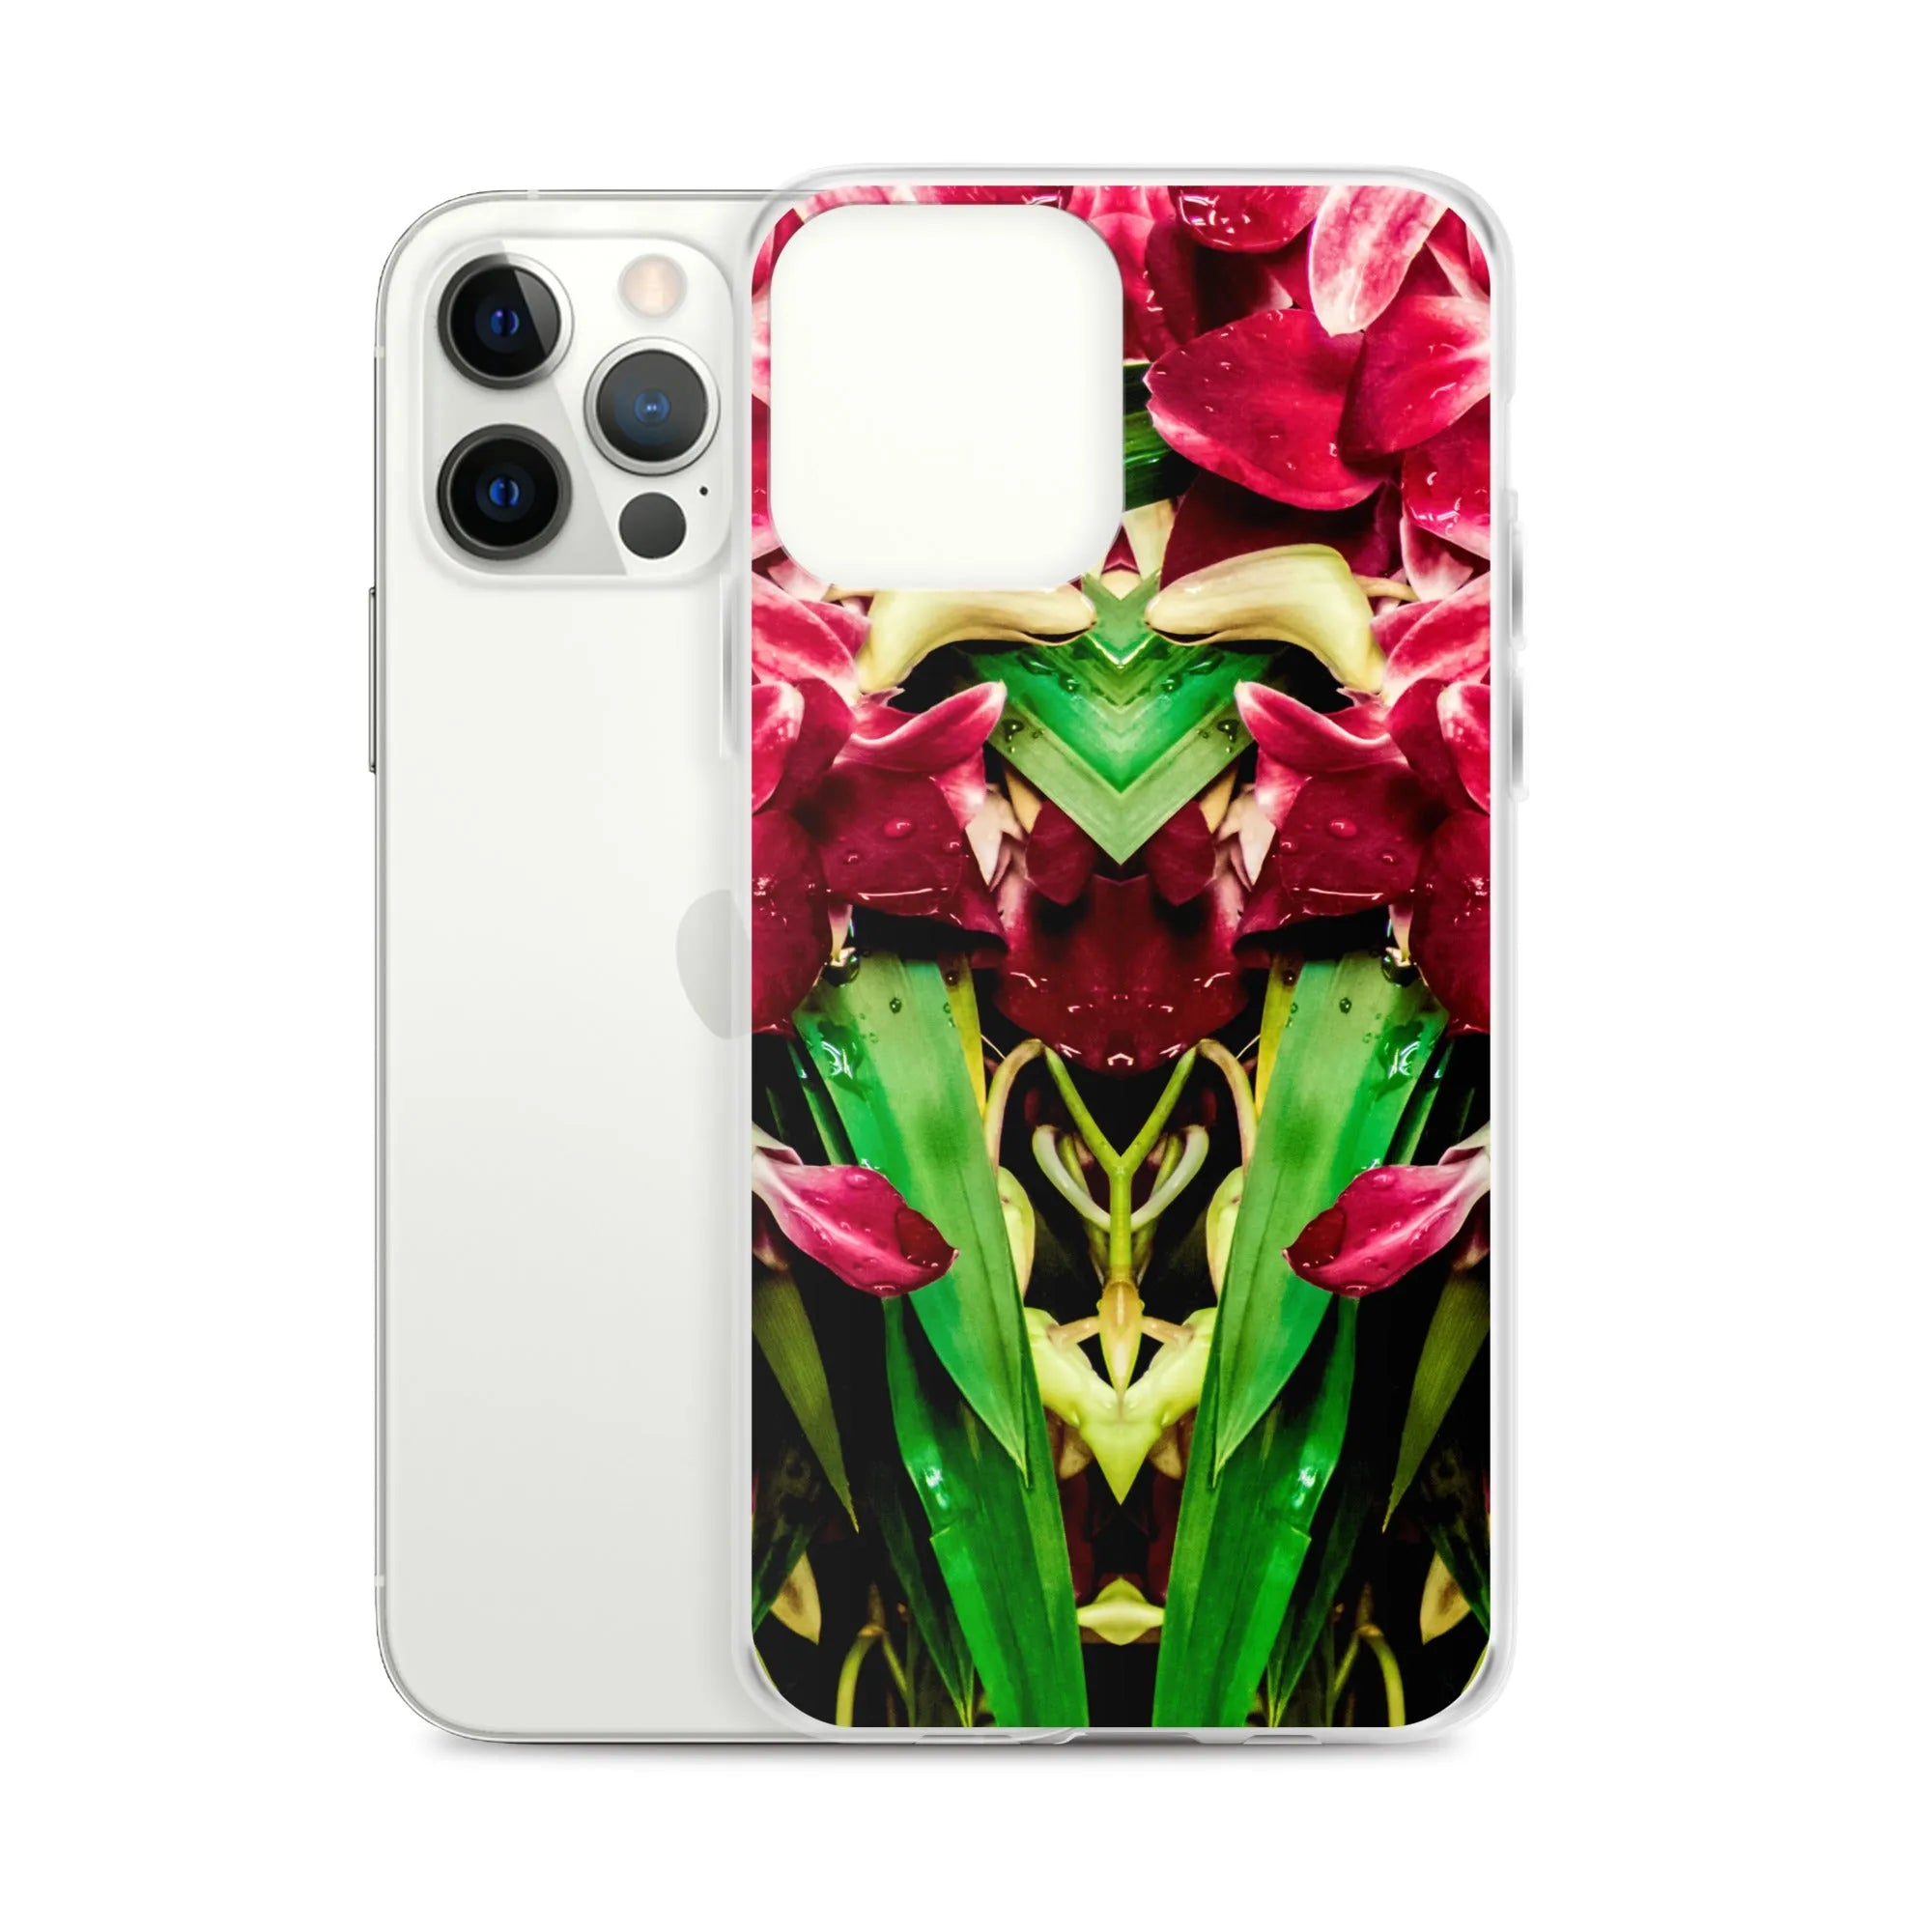 Ruby Reds² Floral Iphone Case - Iphone 12 Pro Max - Mobile Phone Cases - Aesthetic Art